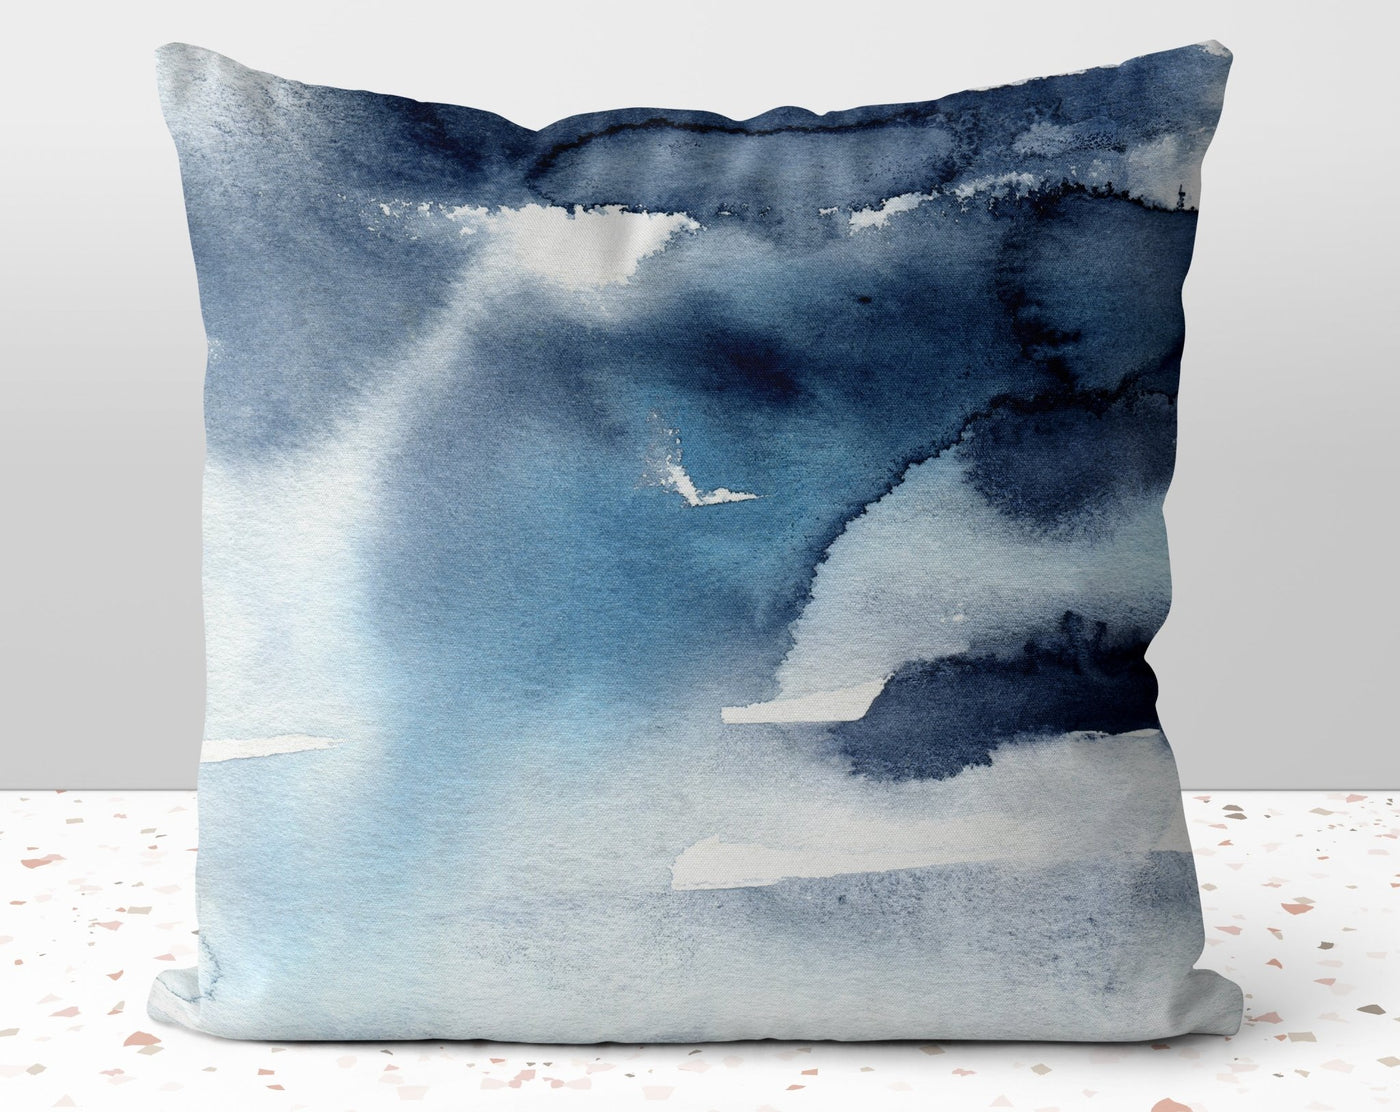 Abstract Landscape Seaside Blue Square Pillow with Cover Throw with Insert - Cush Potato Pillows